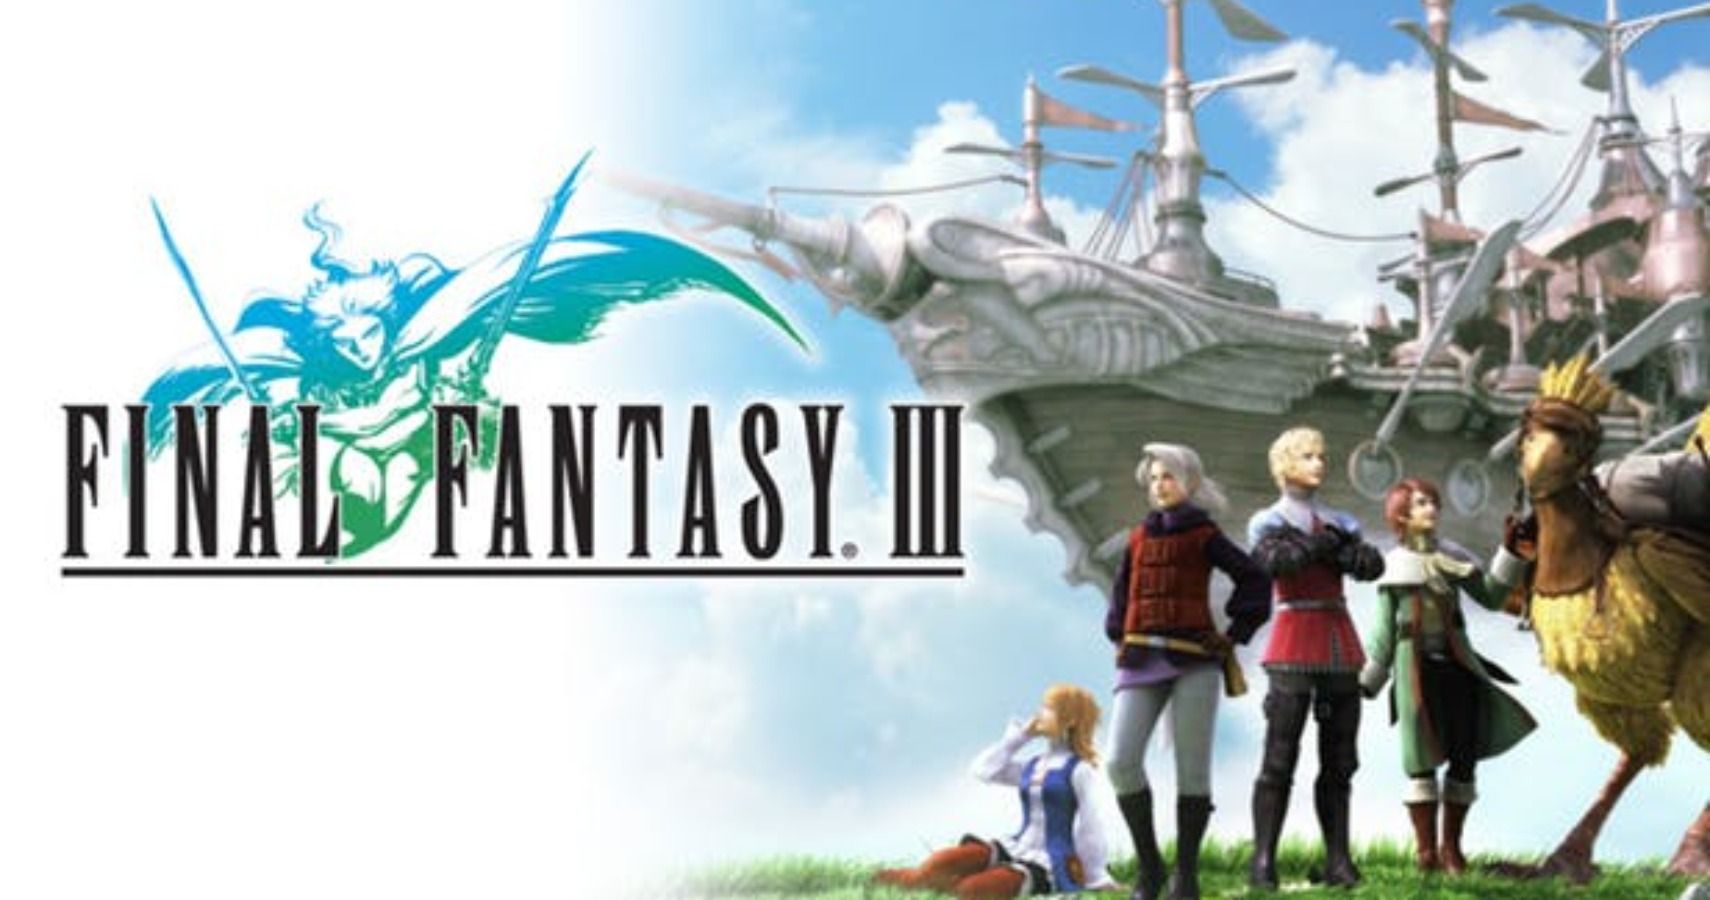 Final Fantasy III On PC & Mobile Is Receiving A Massive Update Years After It Was Originally Released